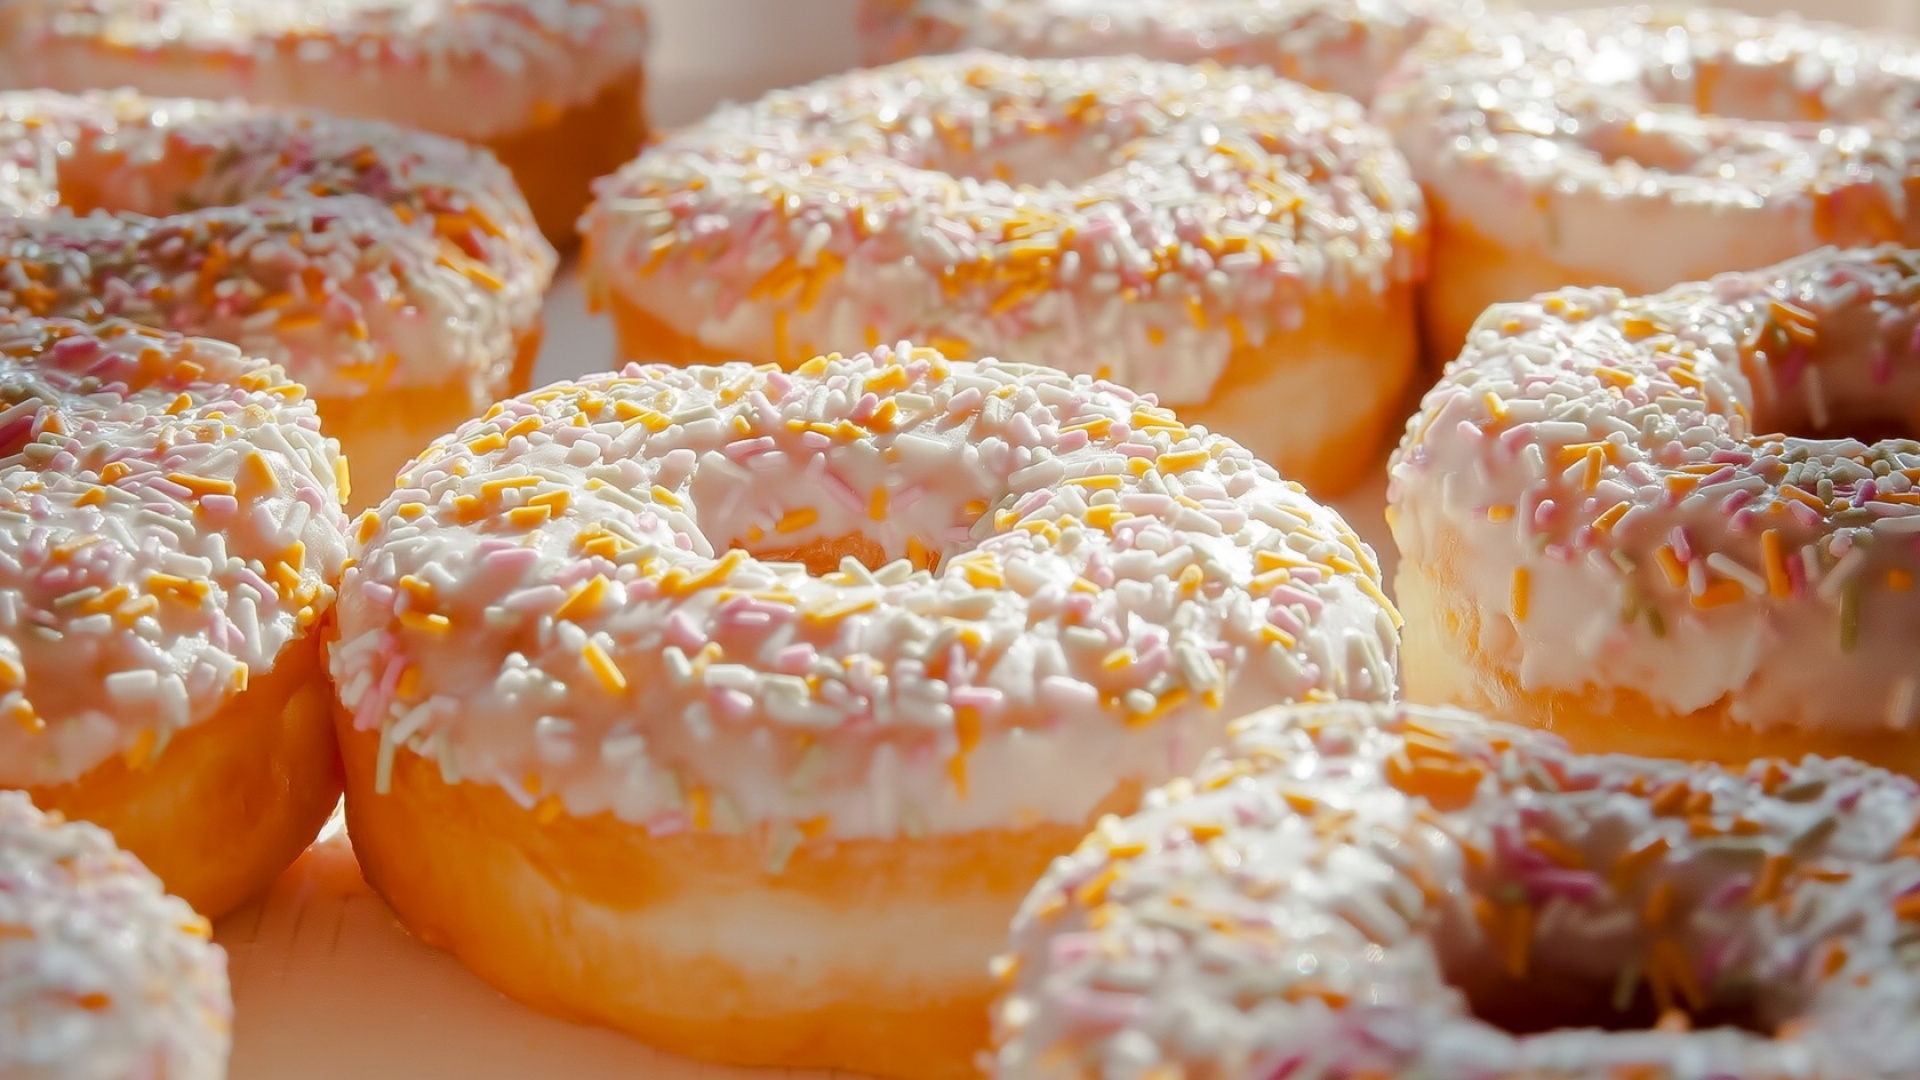 Donut: Eaten as a snack along with a cup of coffee, tea, or milk. 1920x1080 Full HD Wallpaper.